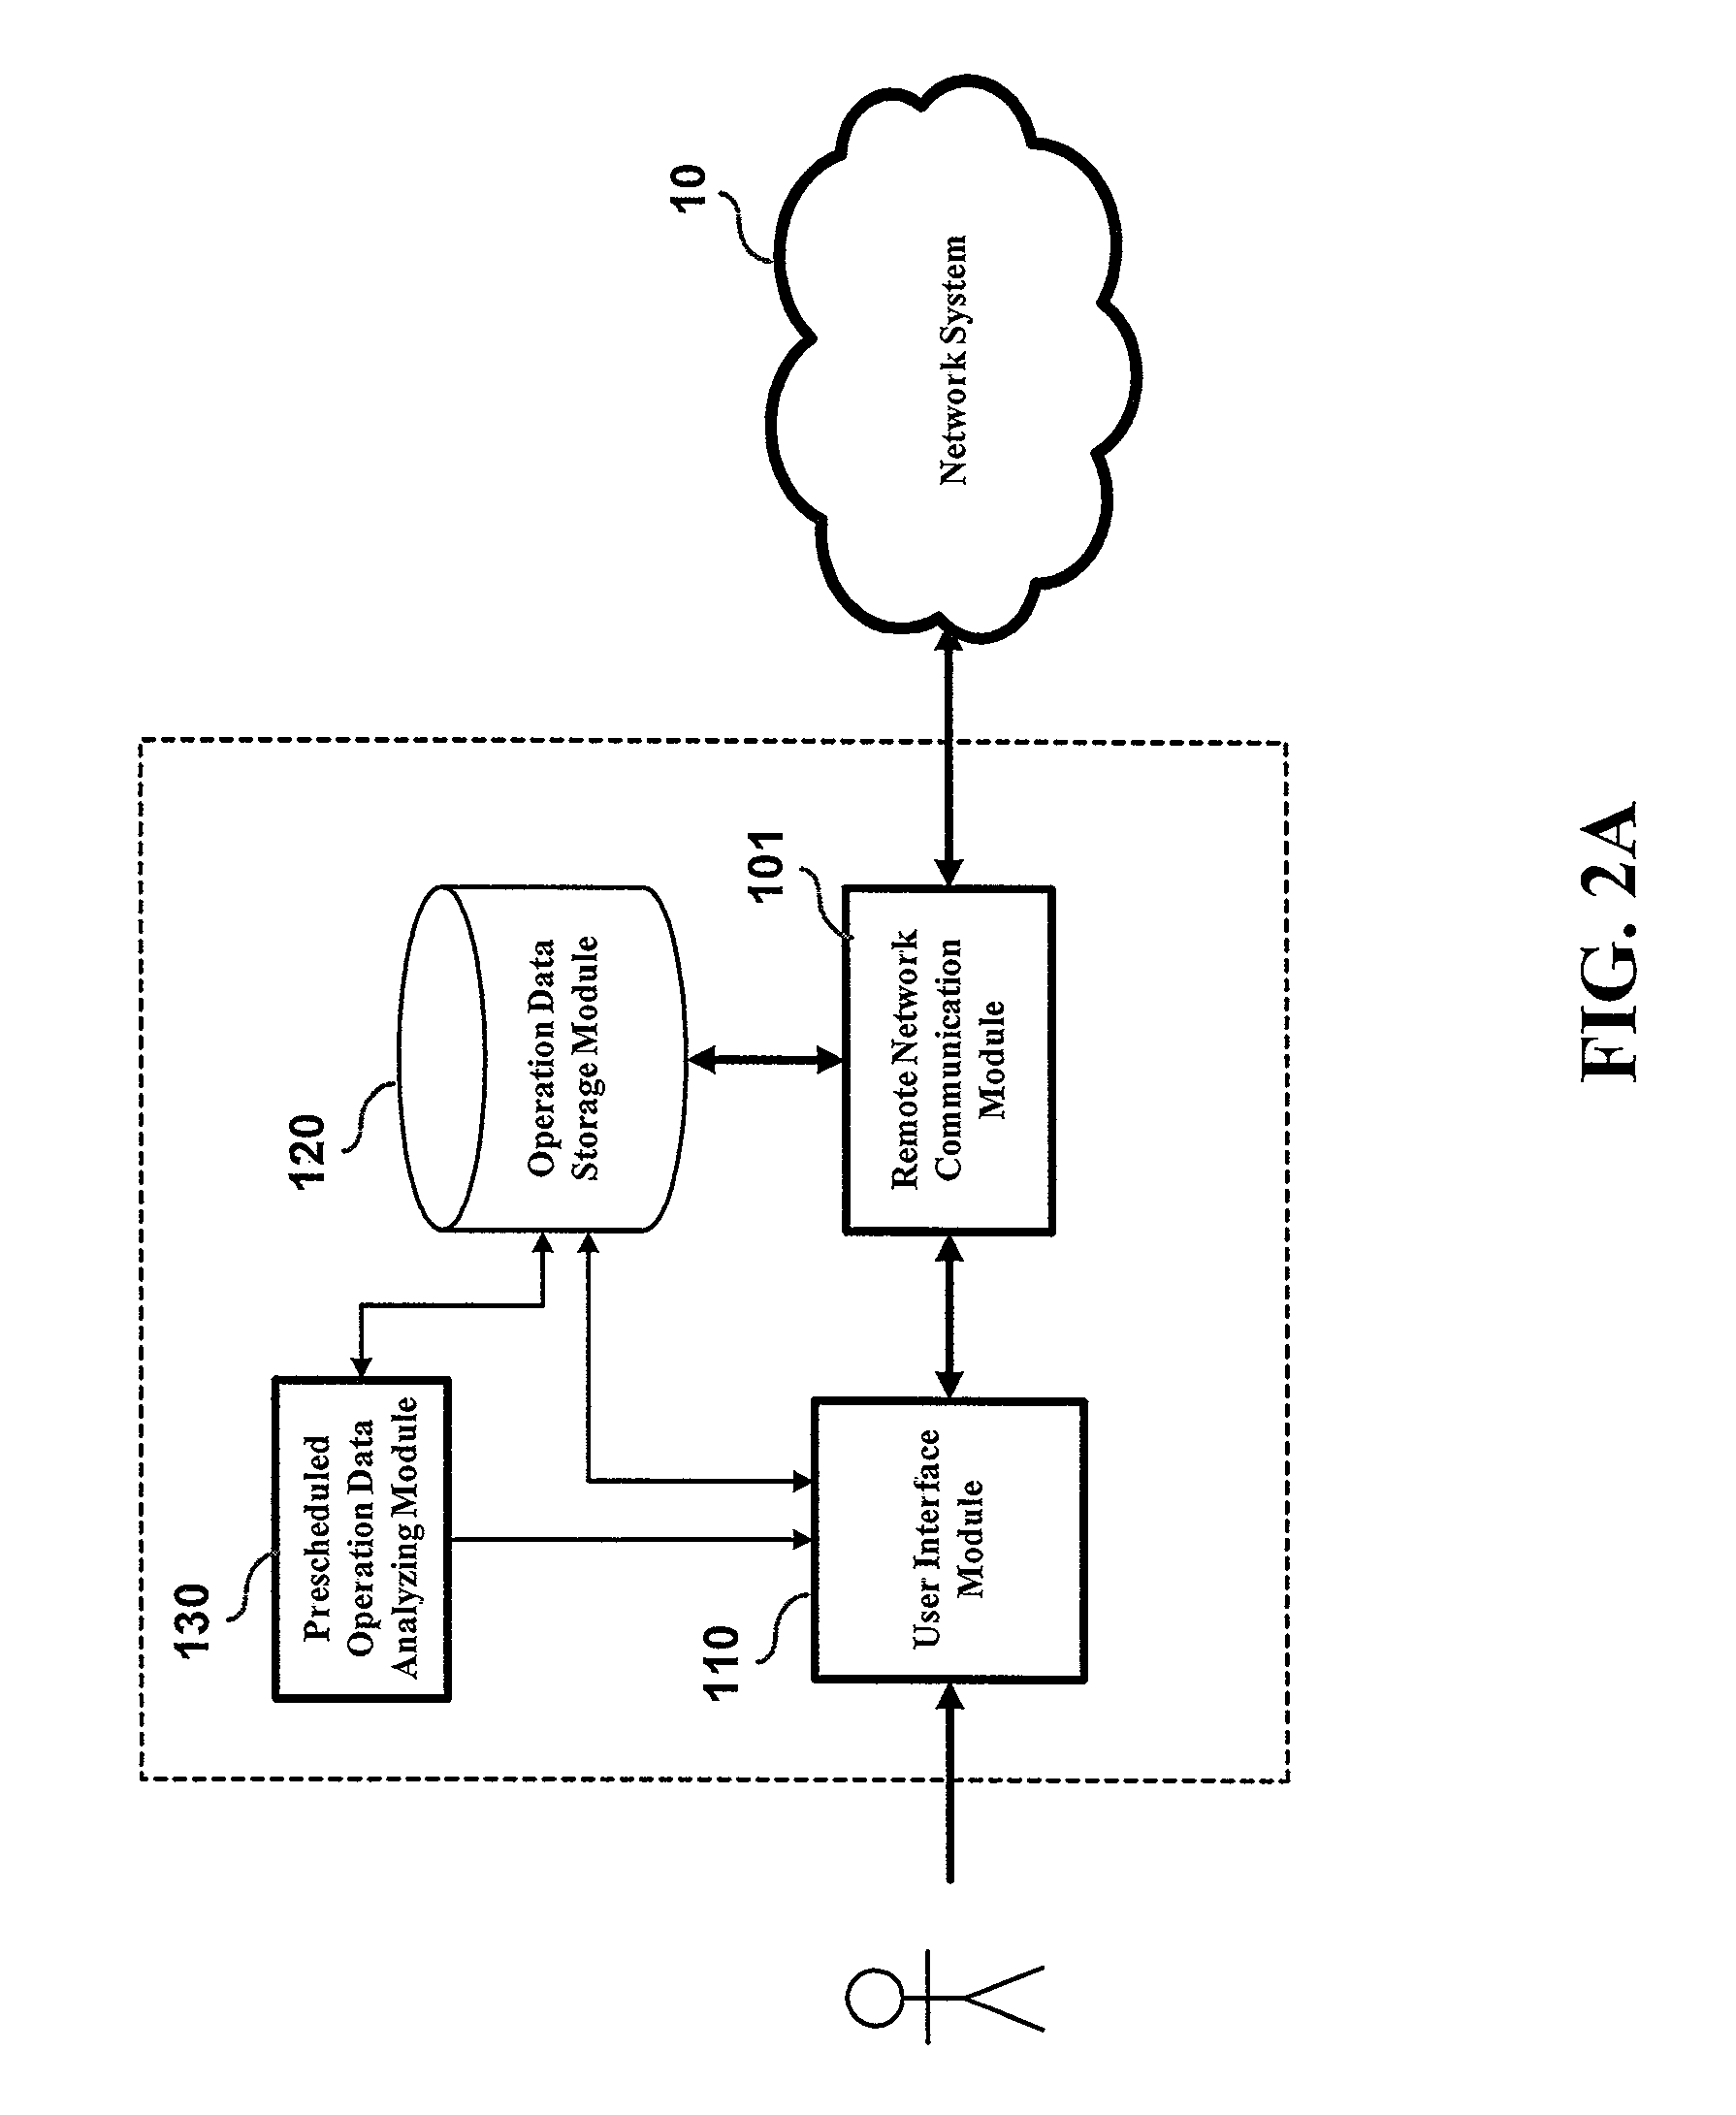 Network-based lighting equipment remote monitoring and management system